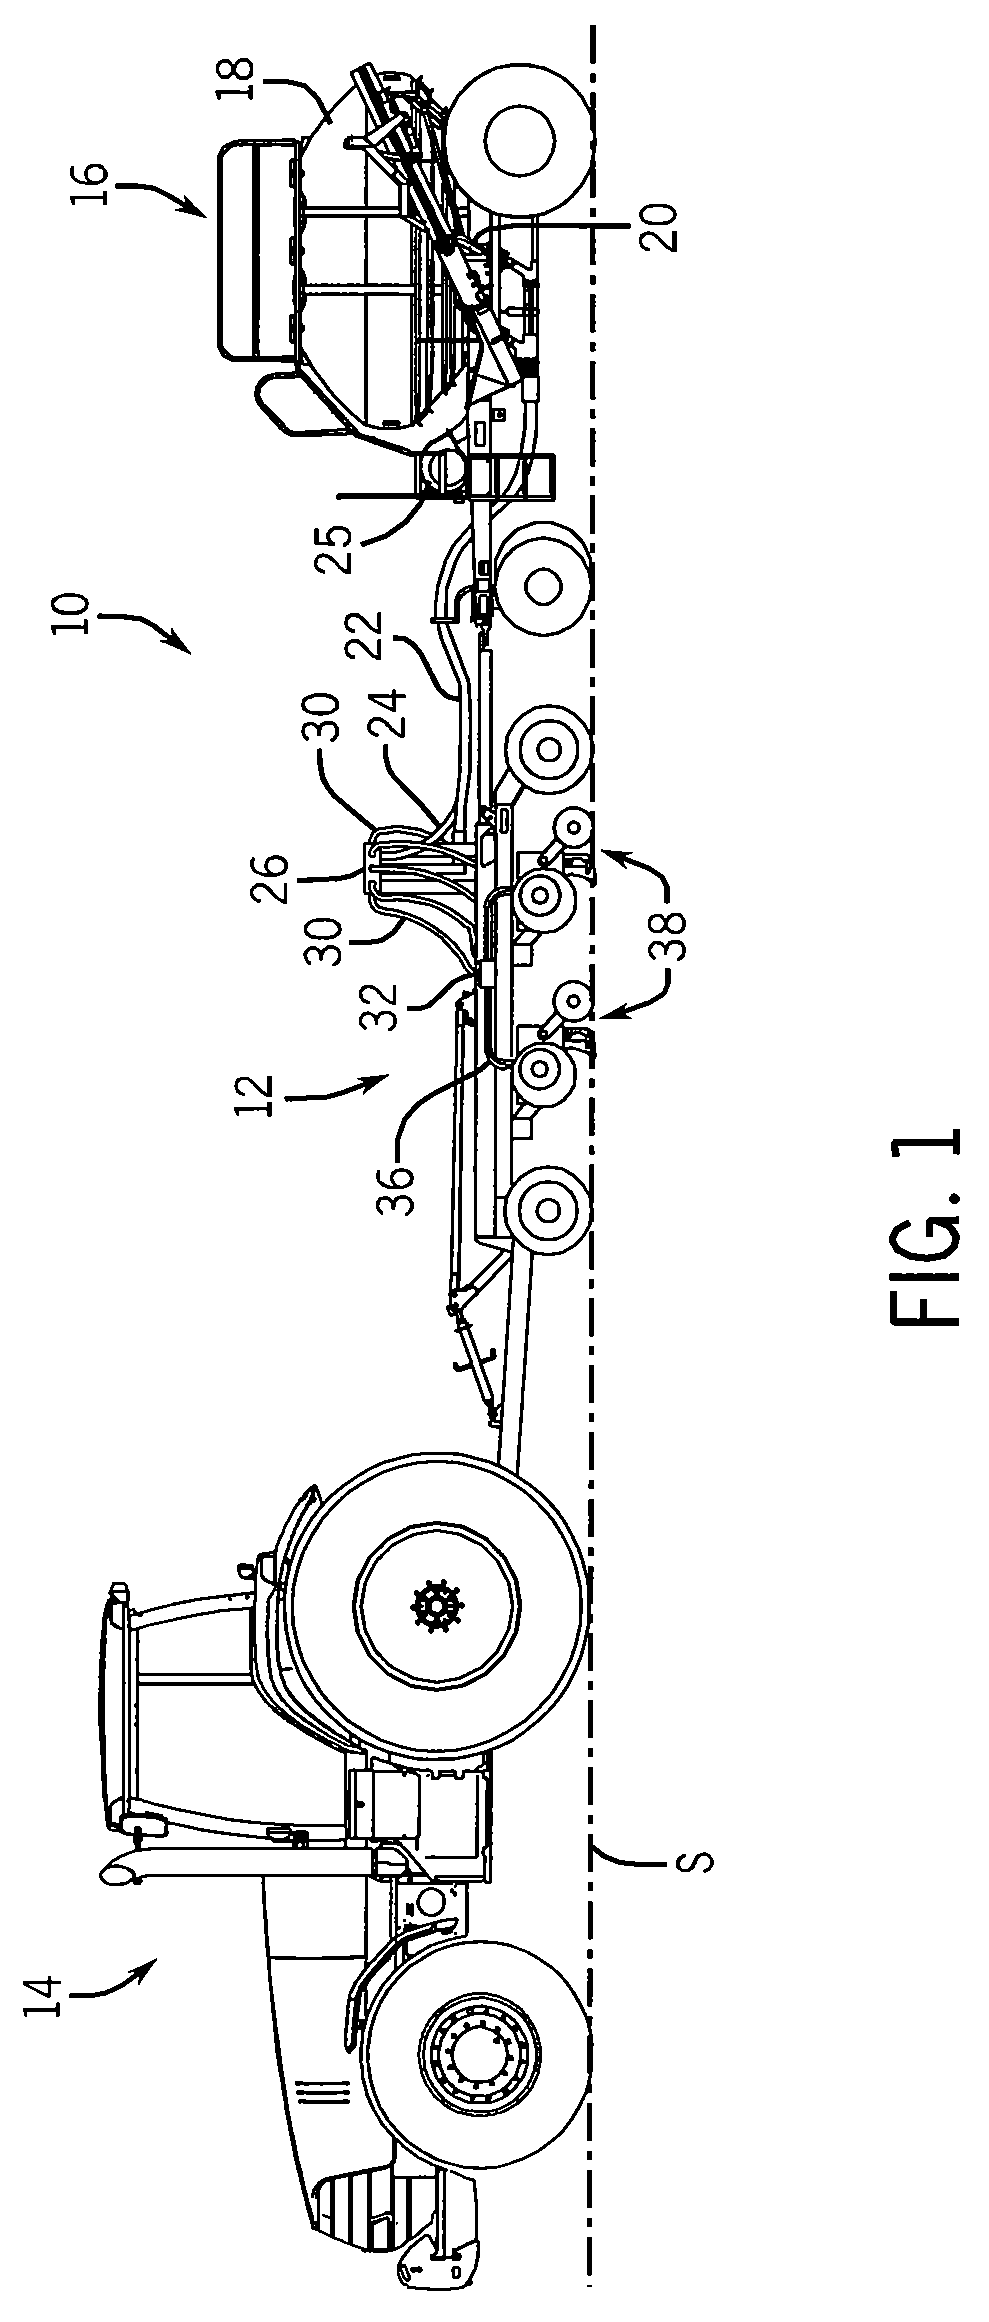 Method and apparatus for sectional control of air seeder distribution system for a farm implement